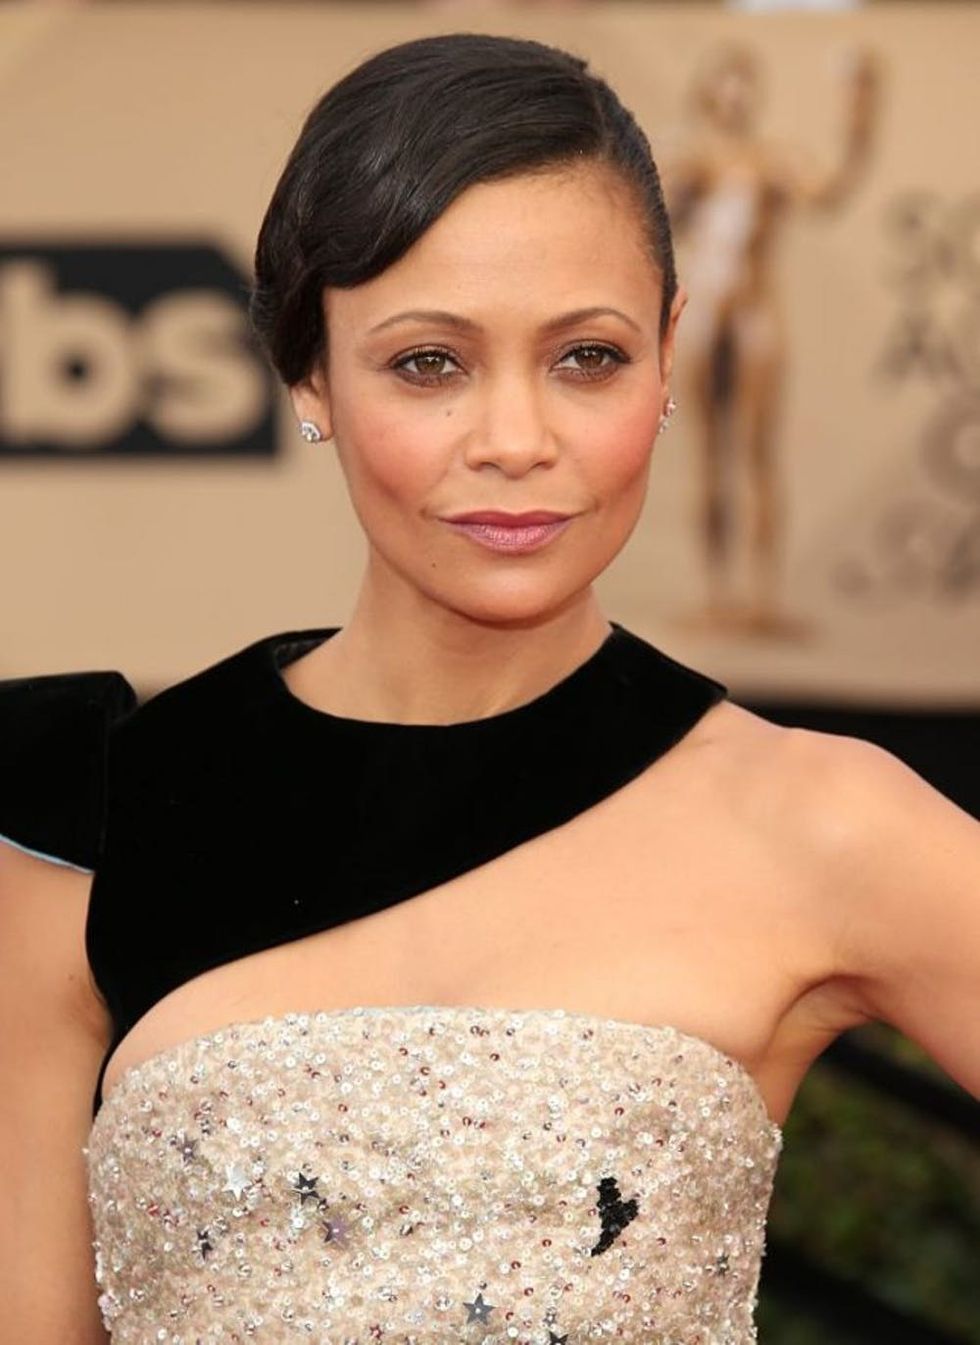 LOS ANGELES, CA - JANUARY 29: Actress Thandie Newton arrives at the 23rd Annual Screen Actors Guild Awards at The Shrine Expo Hall on January 29, 2017 in Los Angeles, California. (Photo by Dan MacMedan/WireImage)